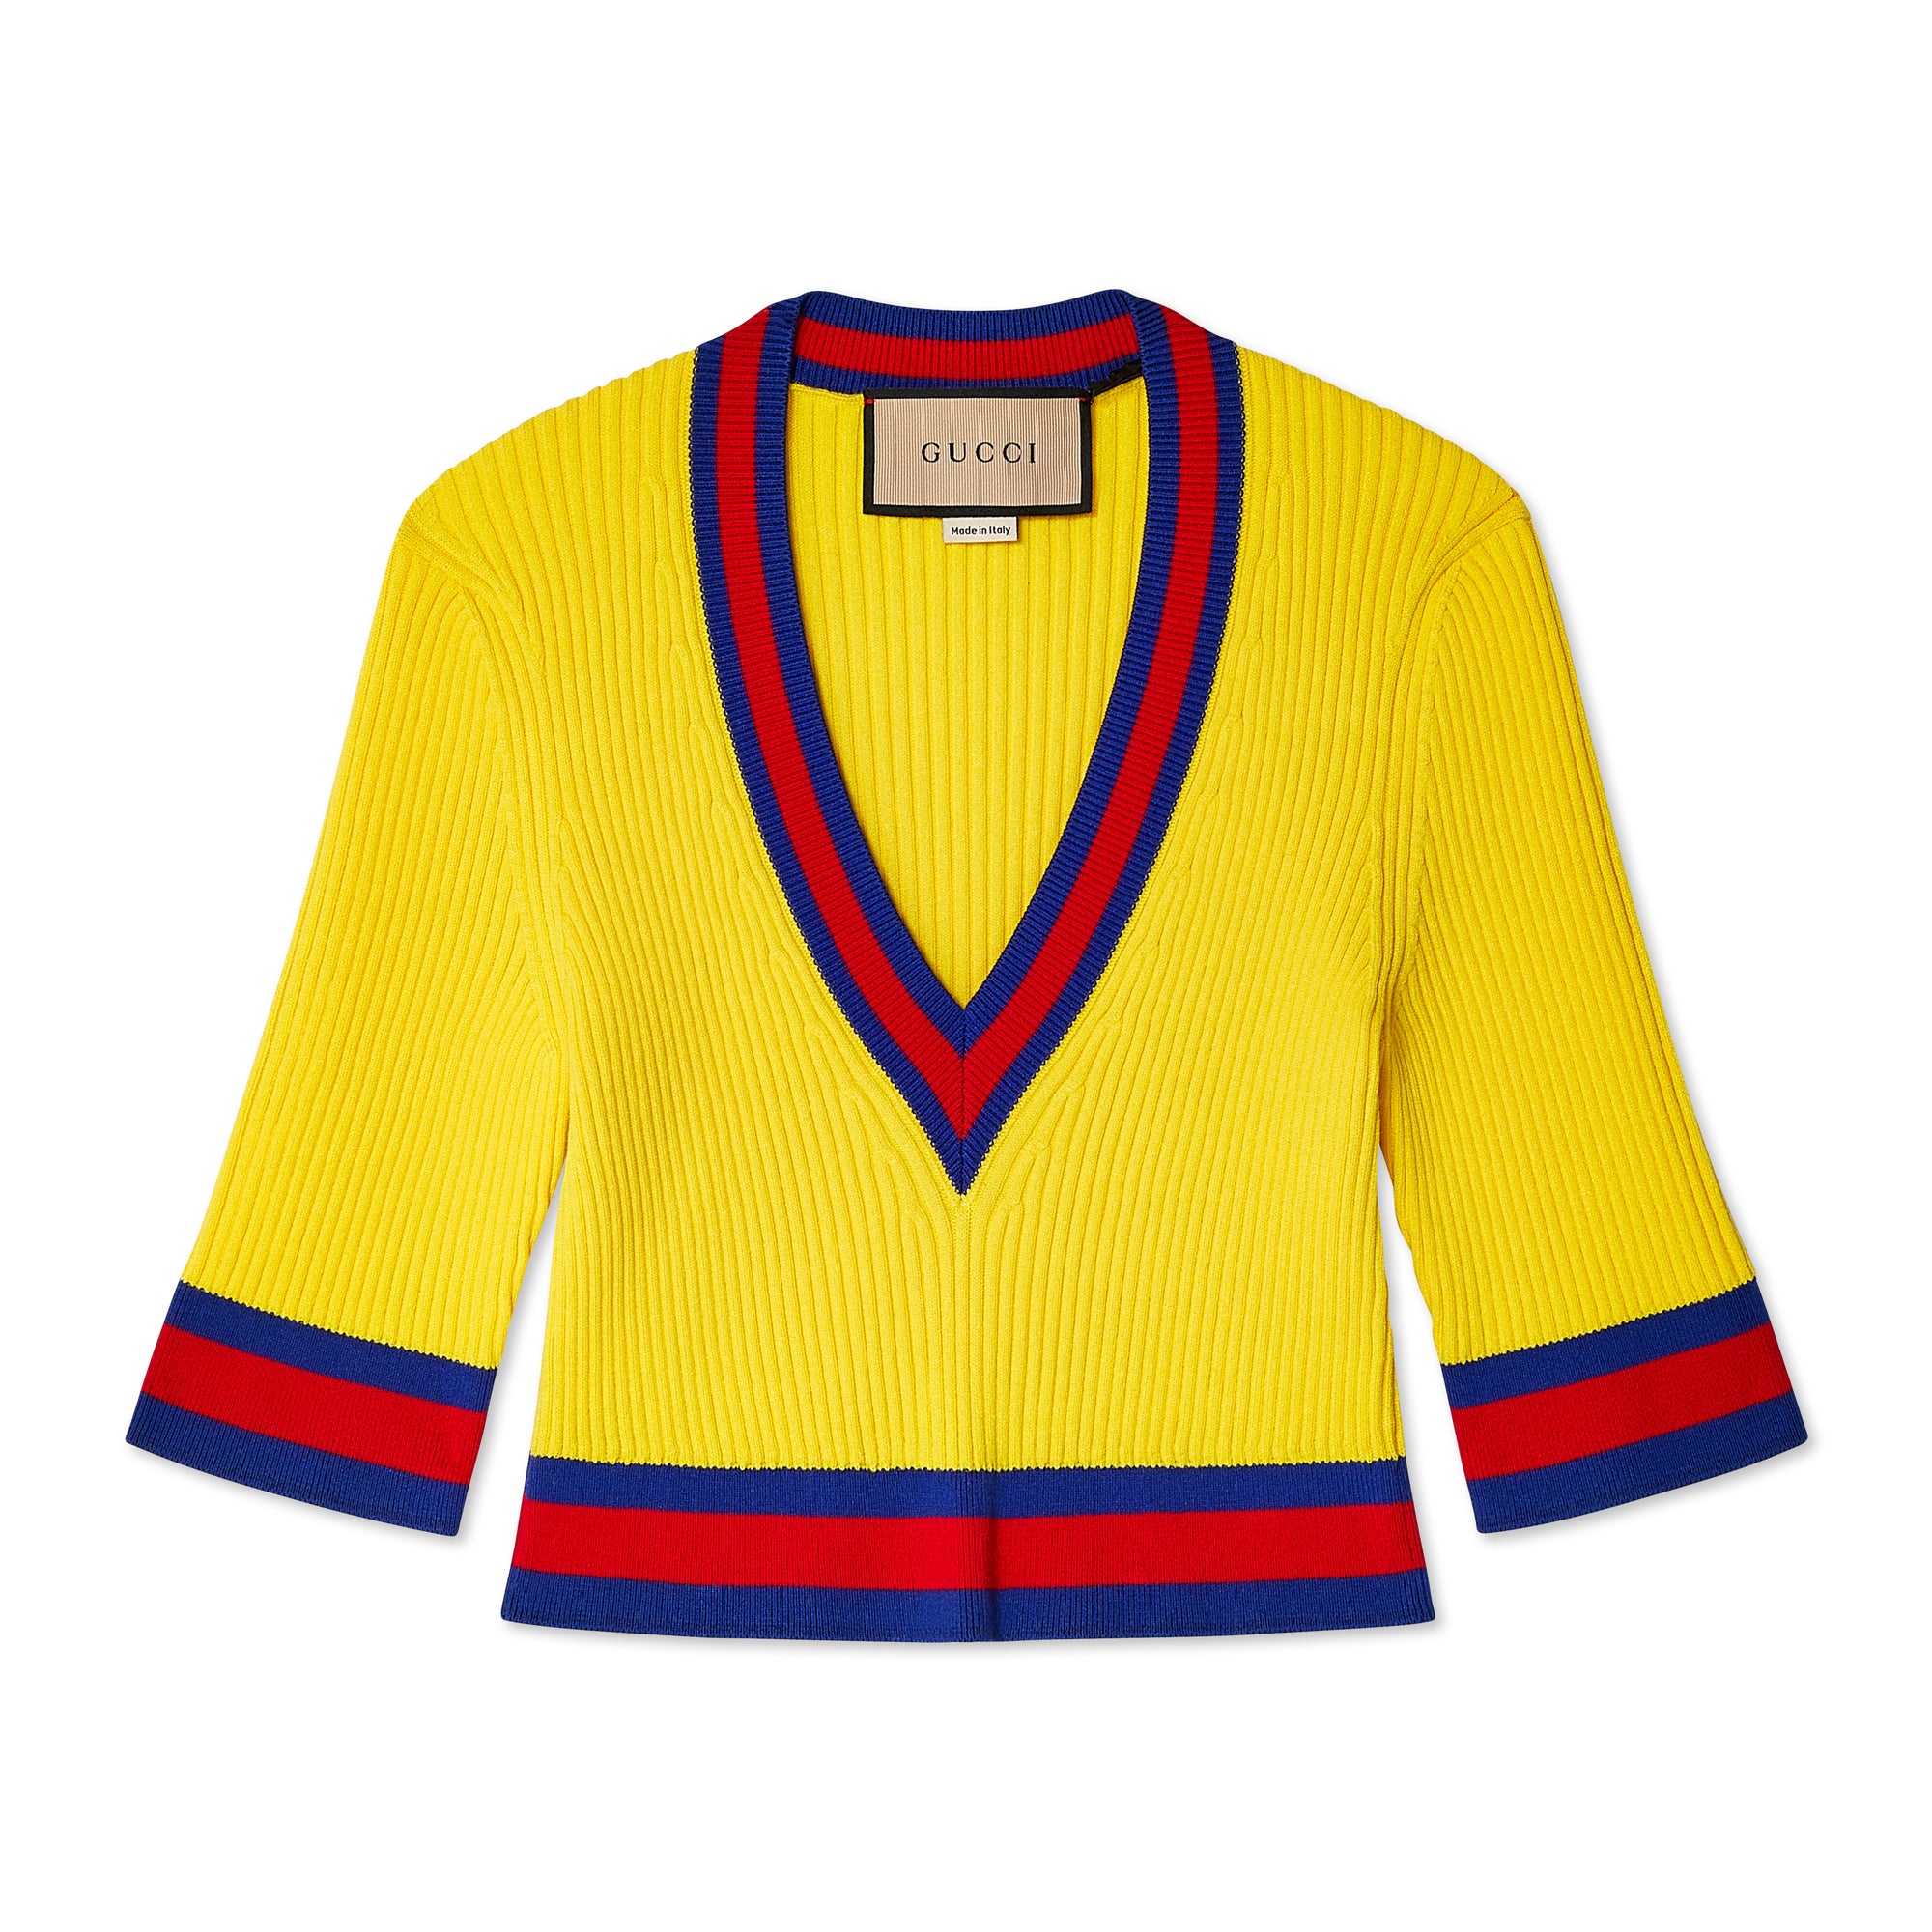 Gucci - Women's Top - (Yellow/Red) view 1